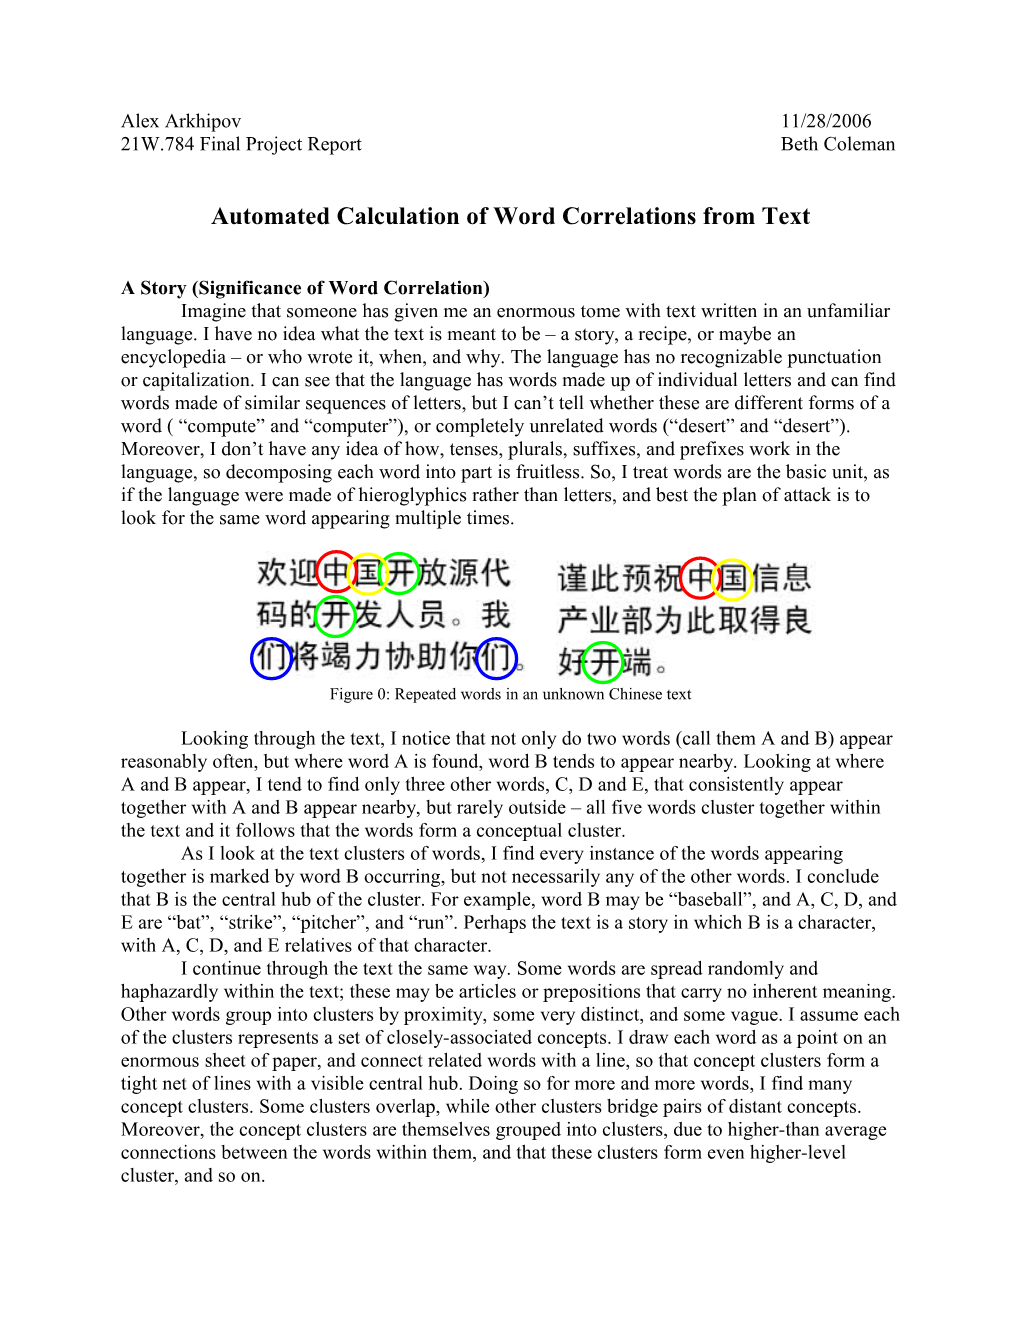 Automated Calculation of Word Correlations from Text